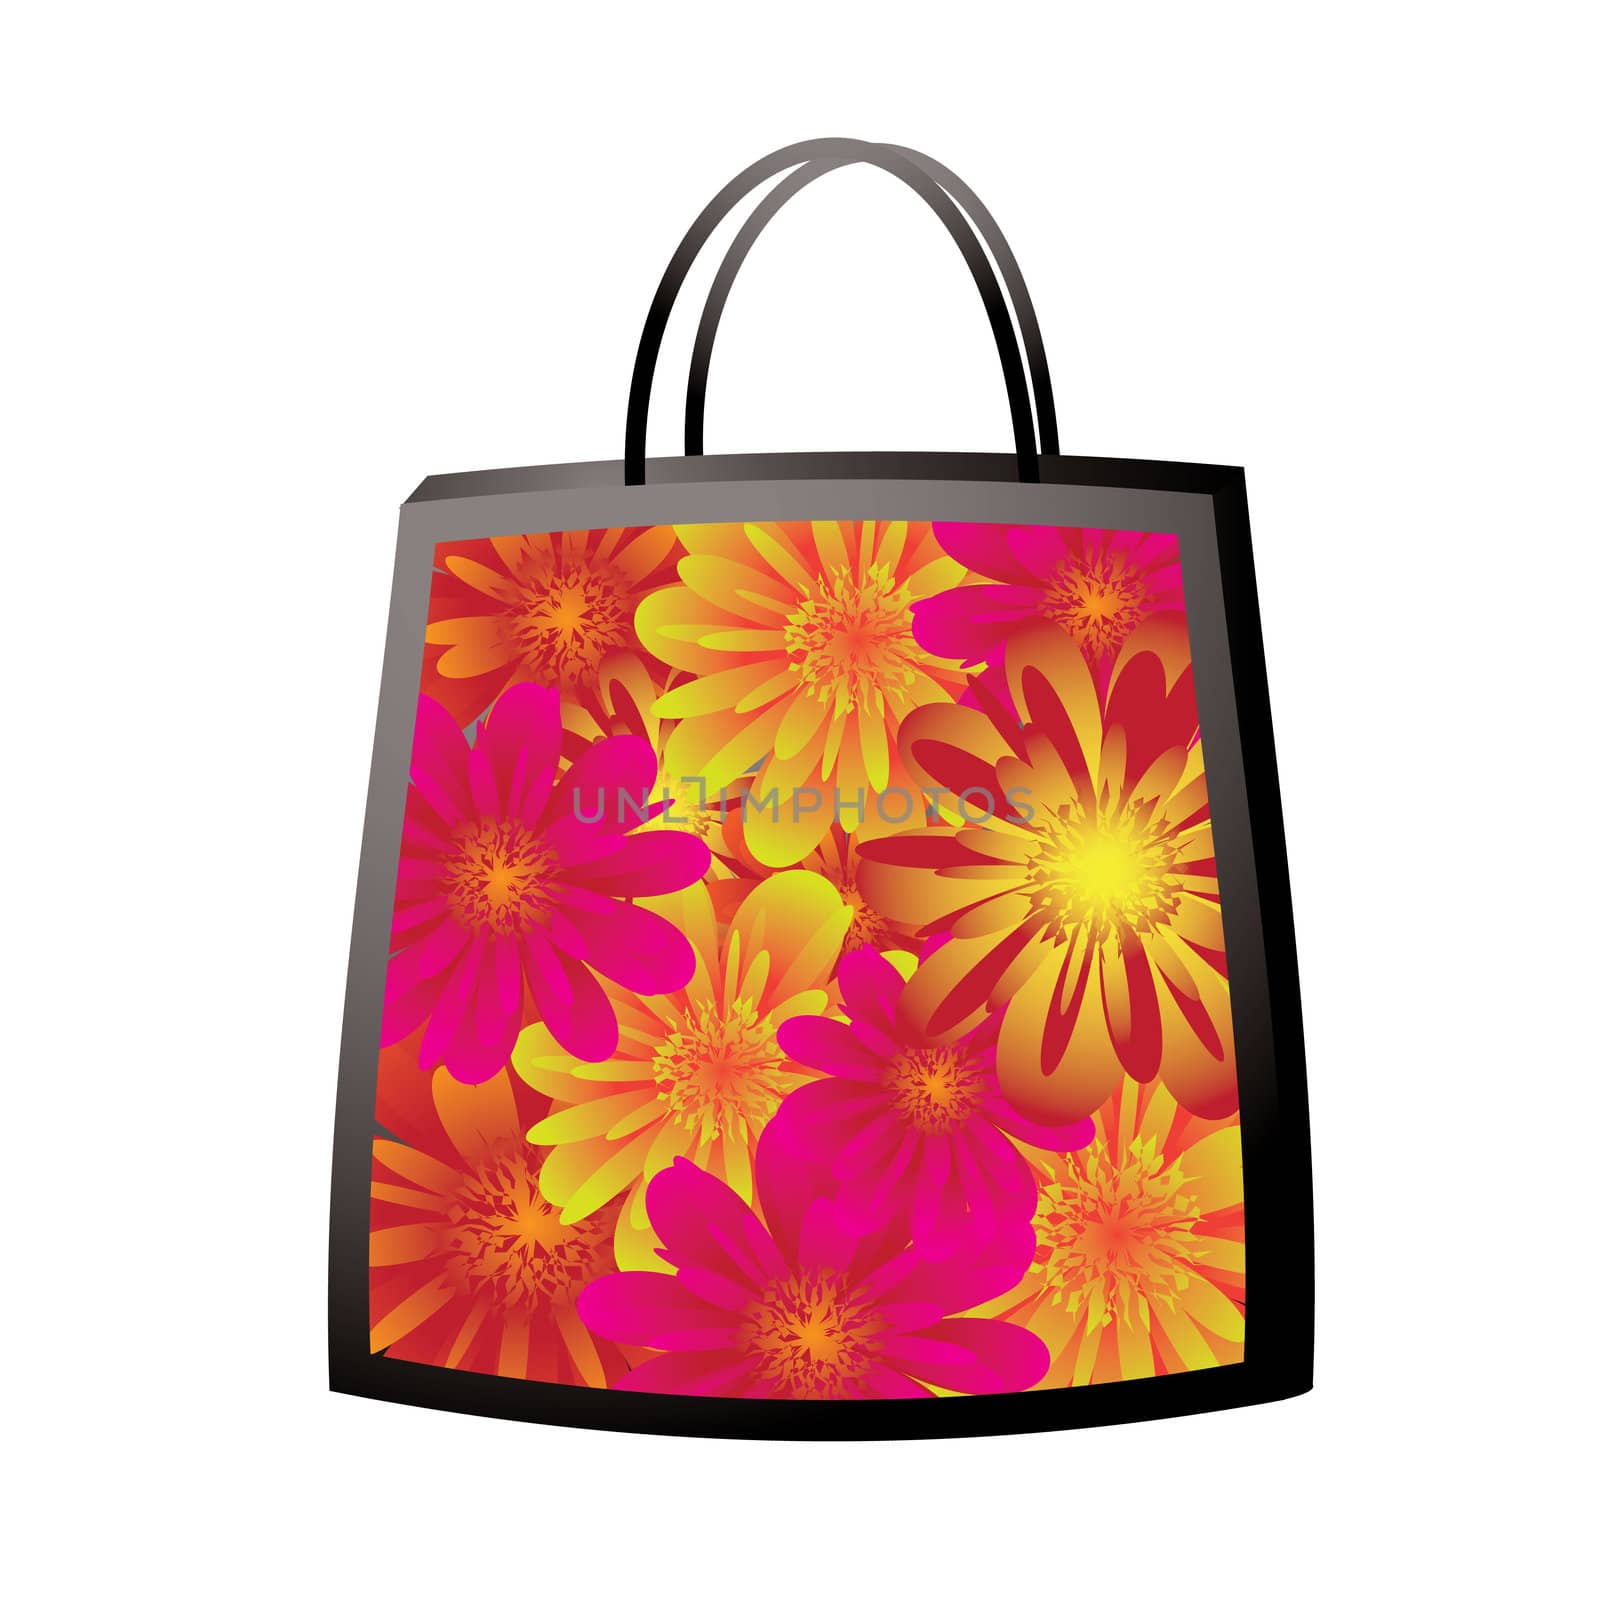 illustrated colorful floral bag with bright vibrant flowers